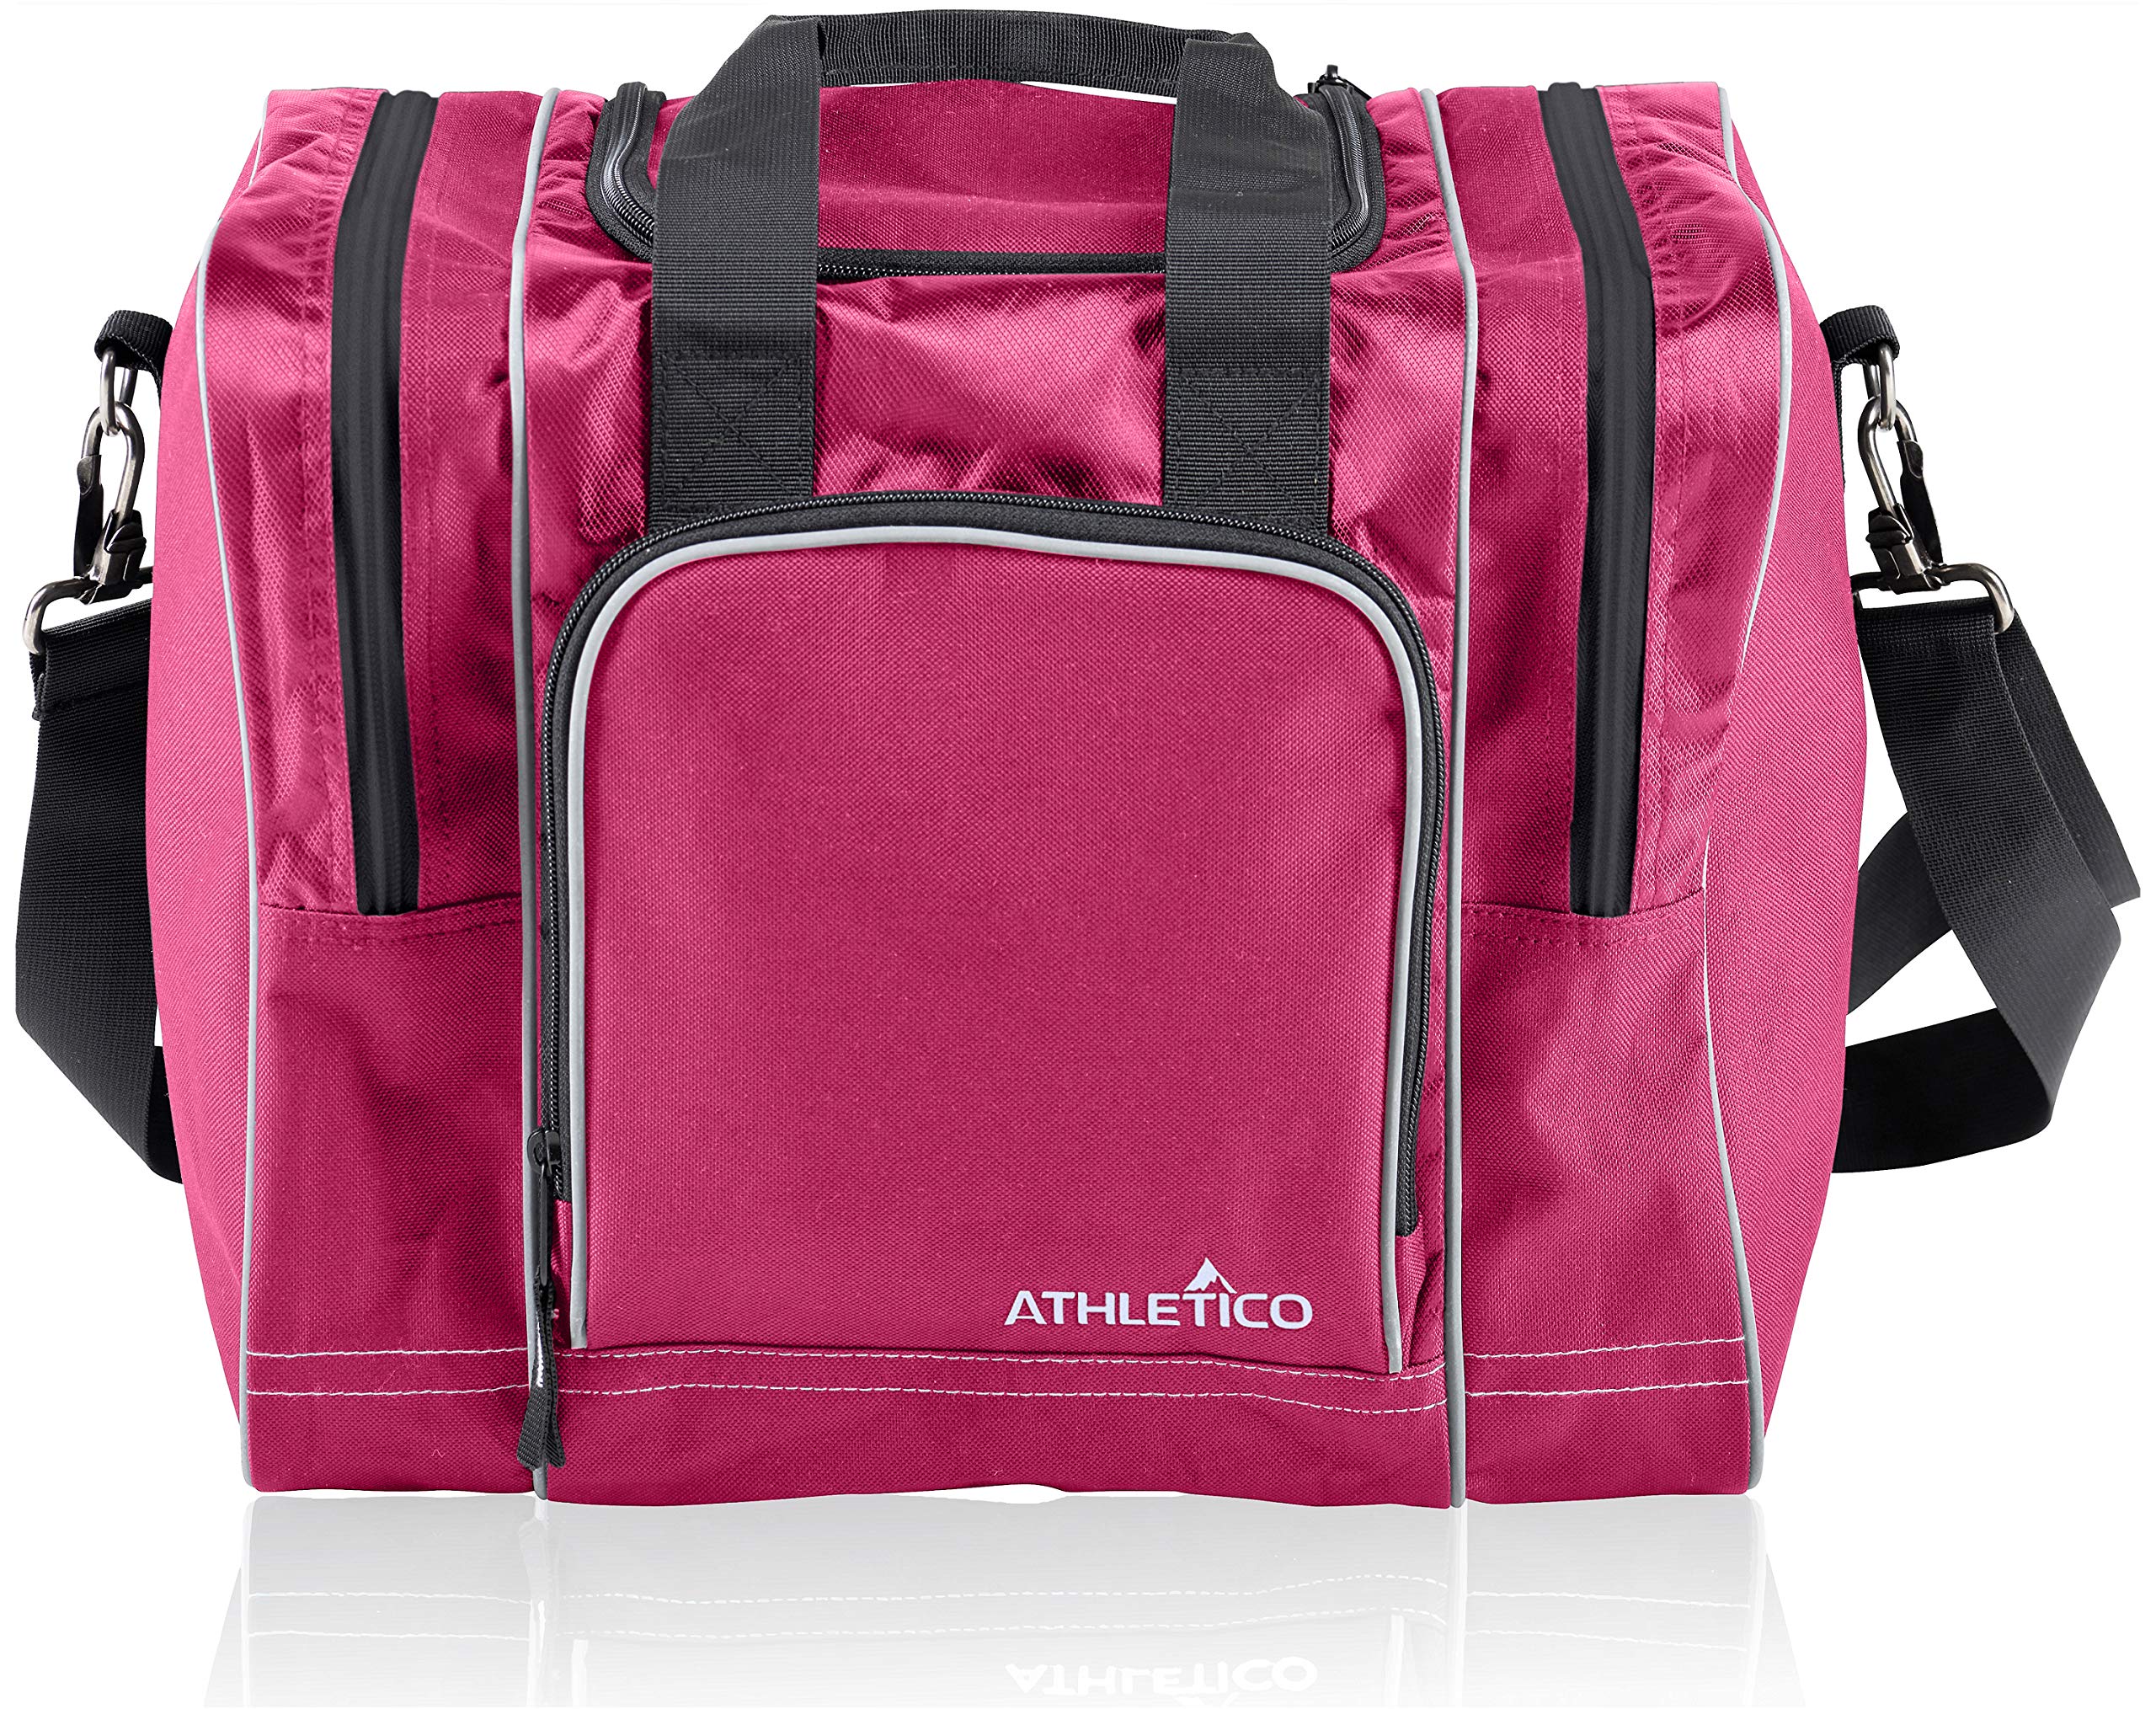 Athletico Bowling Bag for Single Ball - Single Ball Tote Bag With Padded Ball Holder - Fits a Single Pair of Bowling Shoes Up to Mens Size 14 (Pink)  - Very Good